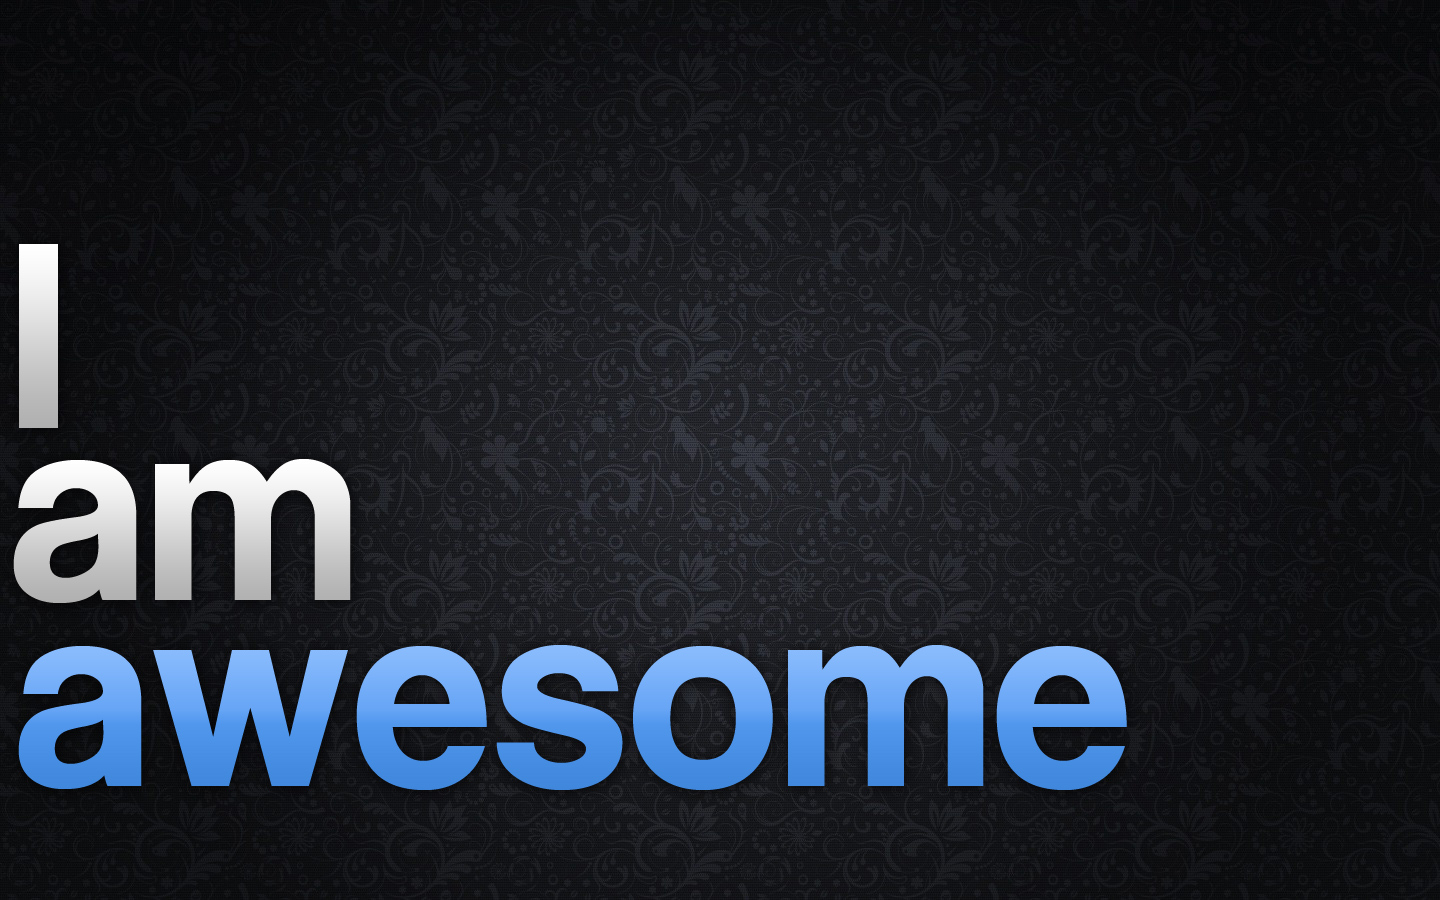 Gallery For Gt I Am Awesome Wallpaper